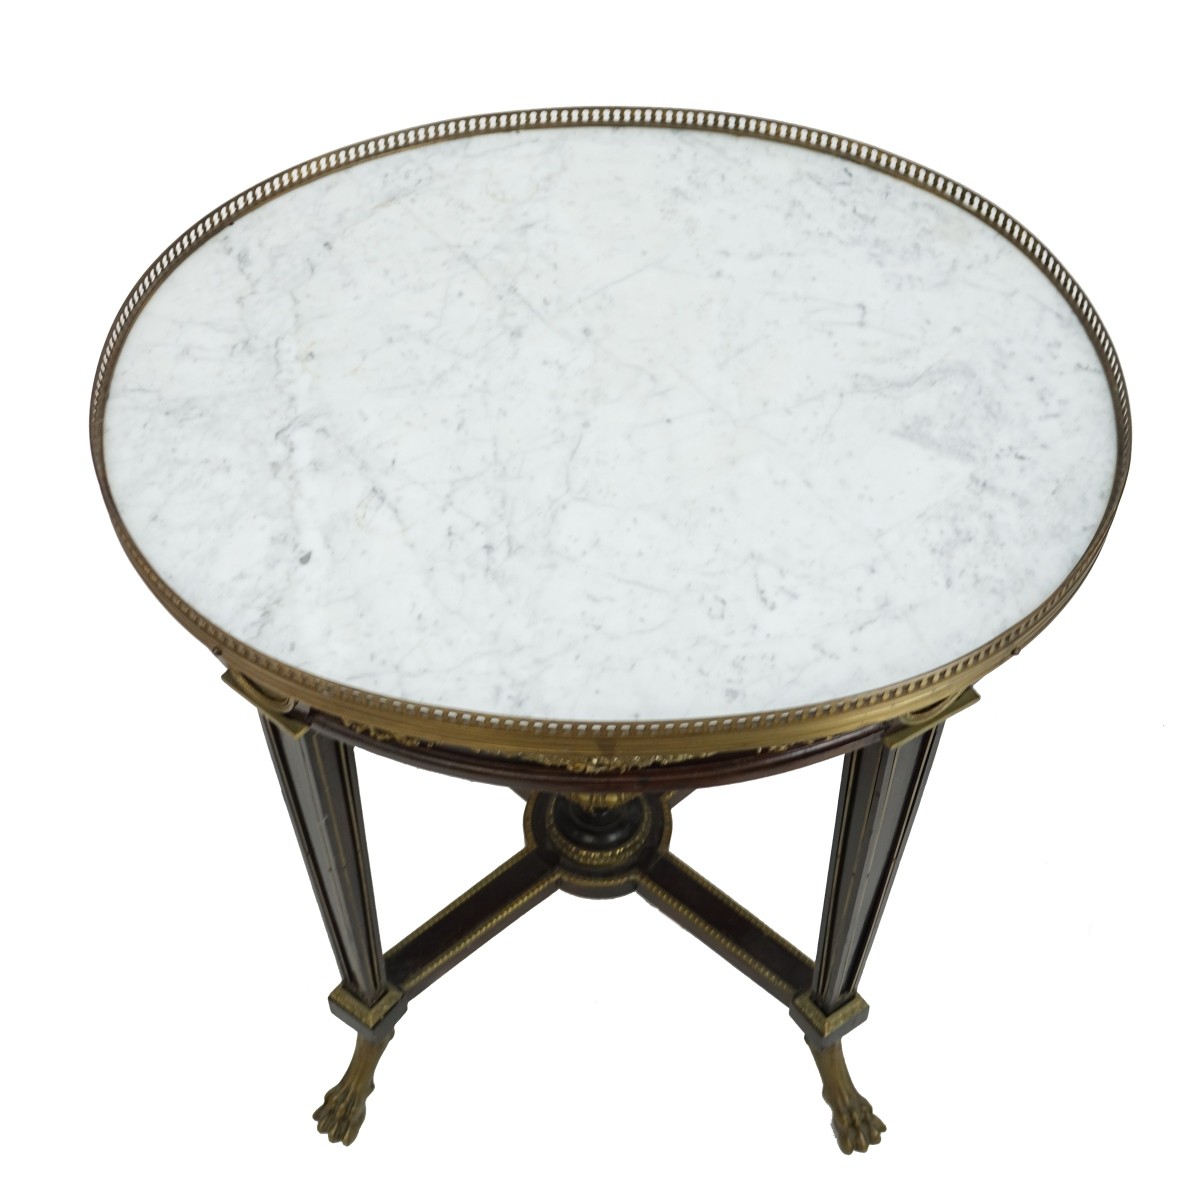 19/20th C. Louis XVI Style Side Table